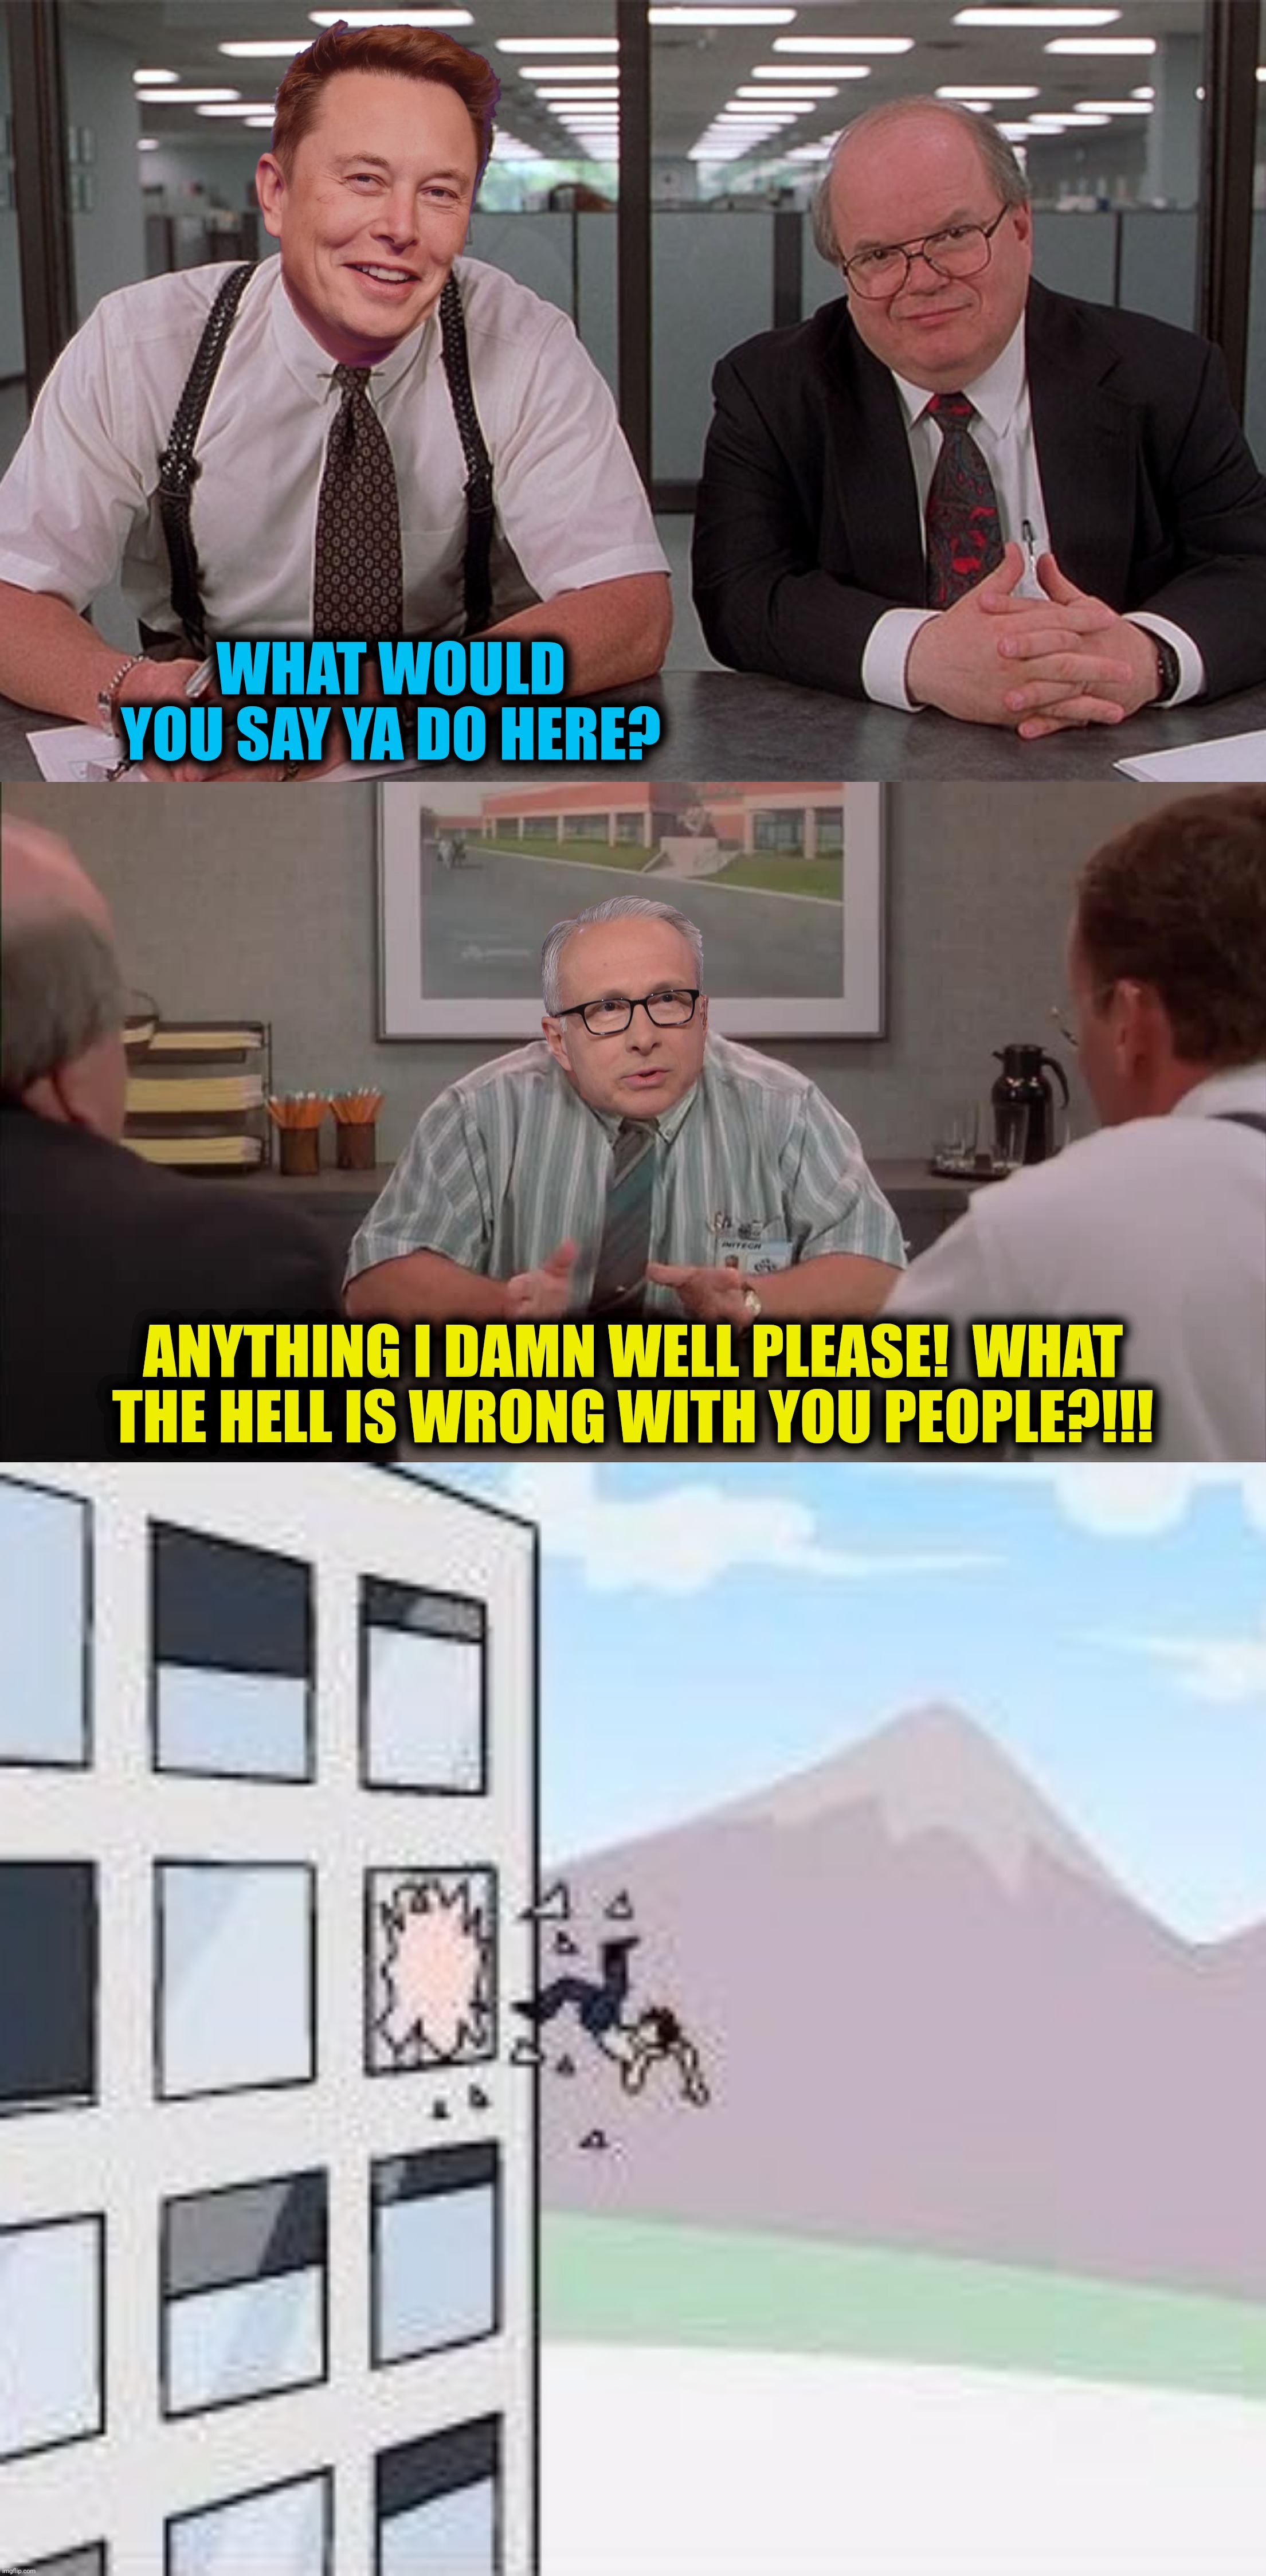 Learning to fly | WHAT WOULD YOU SAY YA DO HERE? ANYTHING I DAMN WELL PLEASE!  WHAT THE HELL IS WRONG WITH YOU PEOPLE?!!! | image tagged in bad photoshop,elon musk,james baker,office space,boardroom meeting suggestion | made w/ Imgflip meme maker